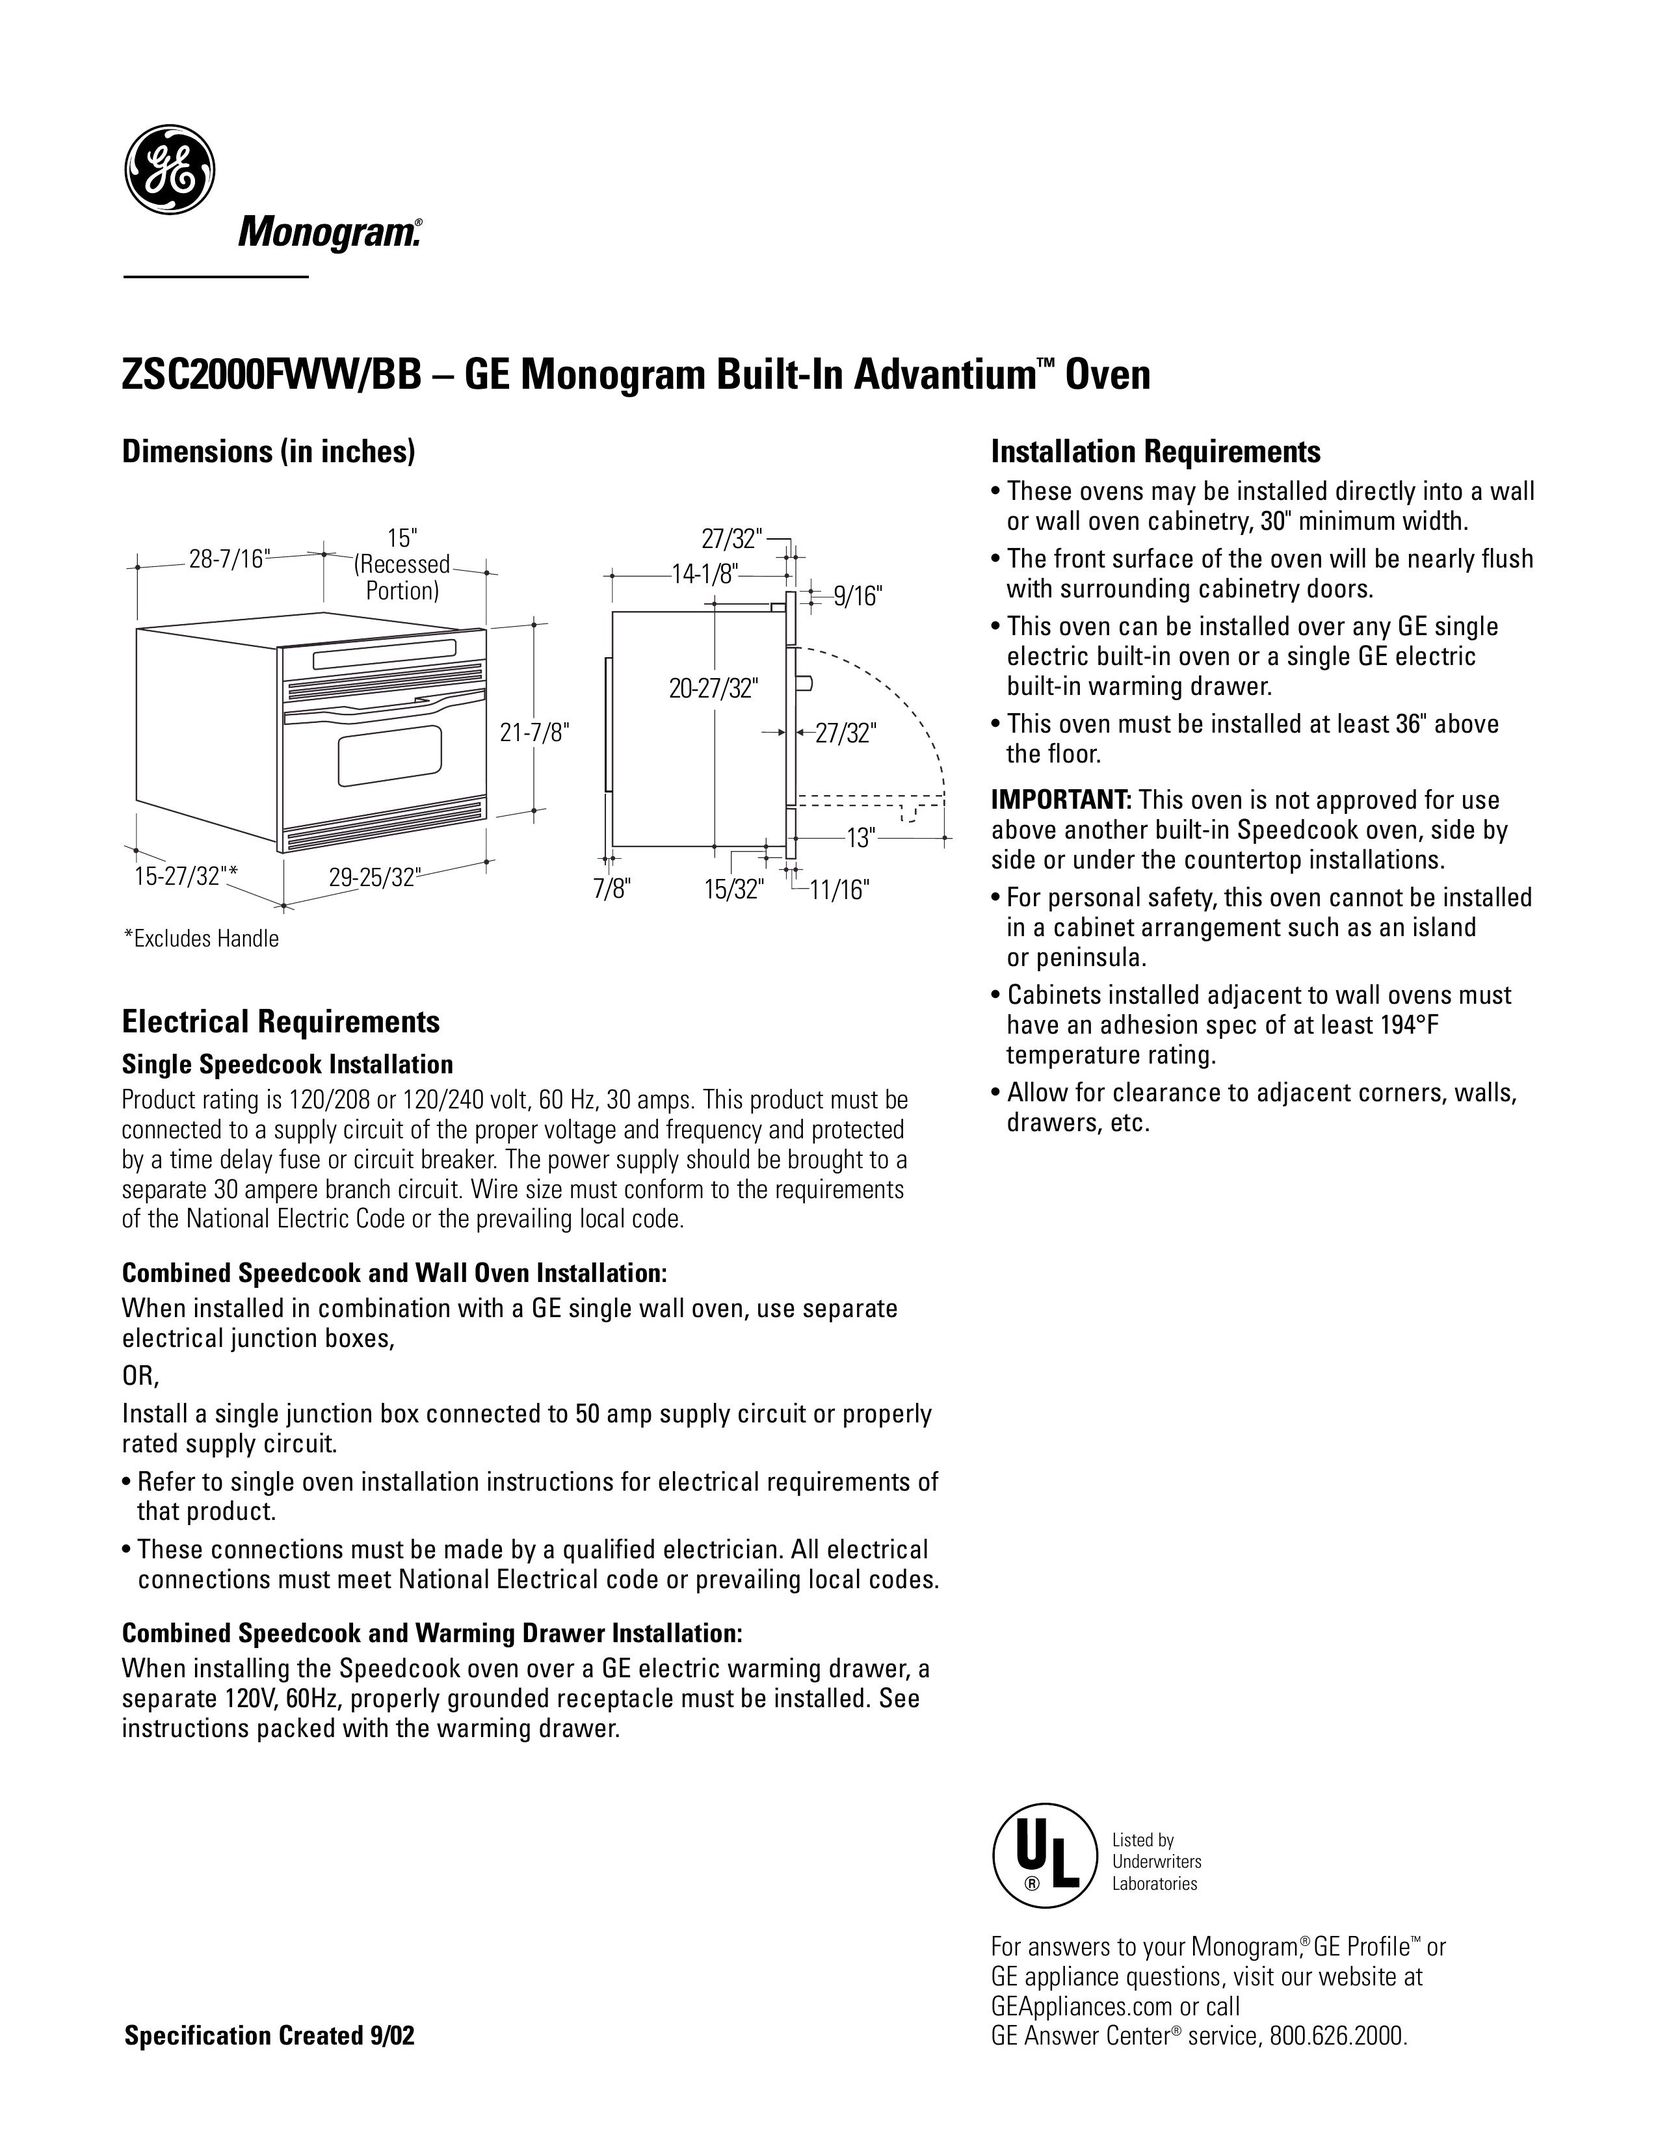 GE Monogram ZSC2000FWW/BB Oven User Manual